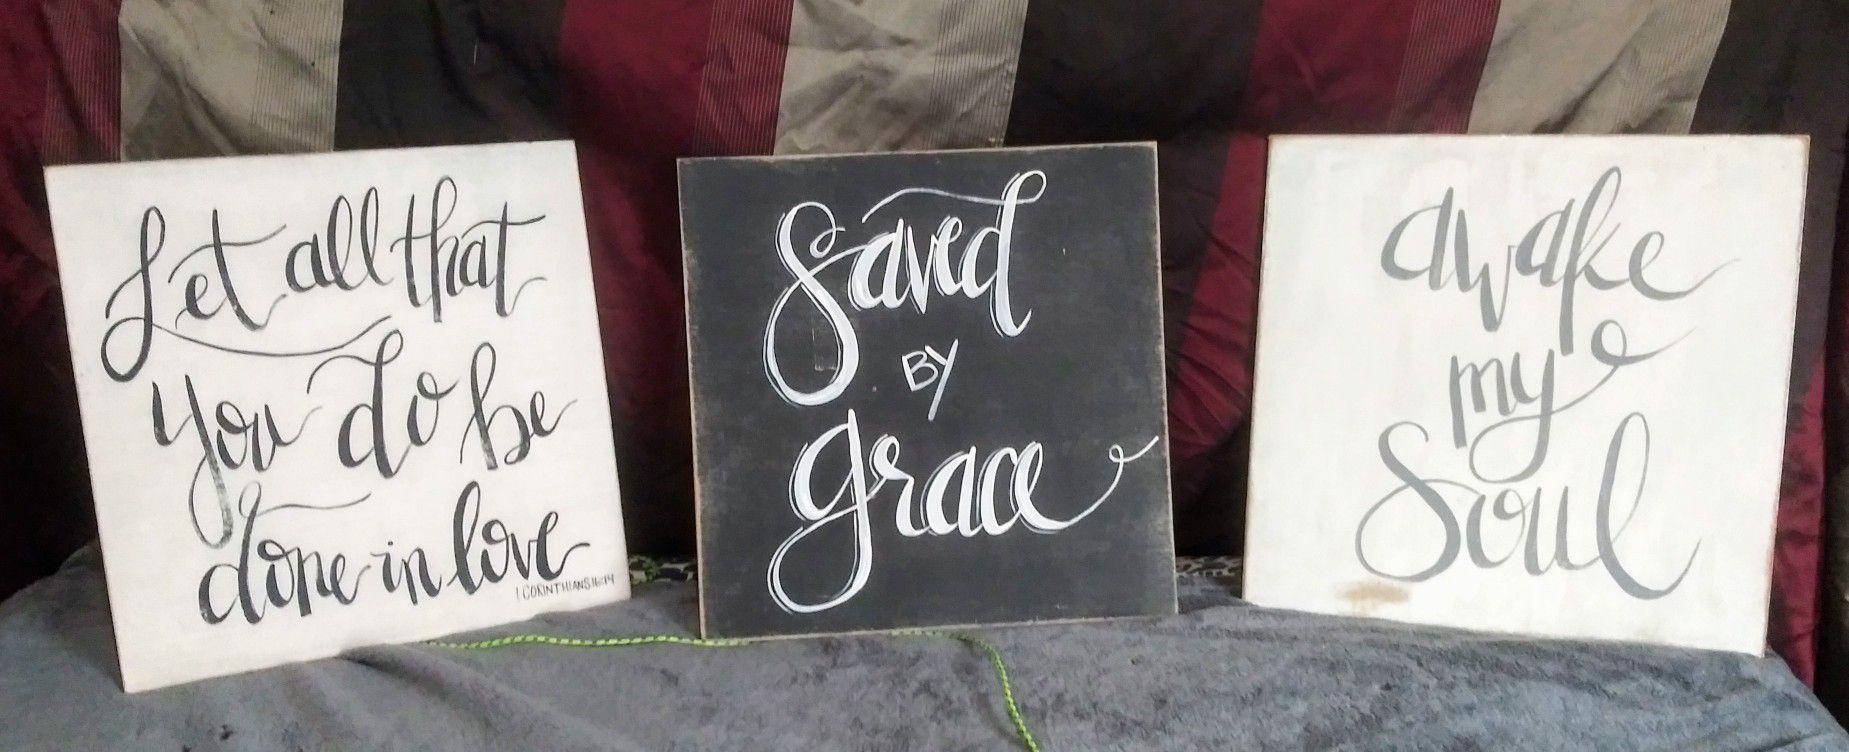 Hand Painted Christian Inspired Wall Art